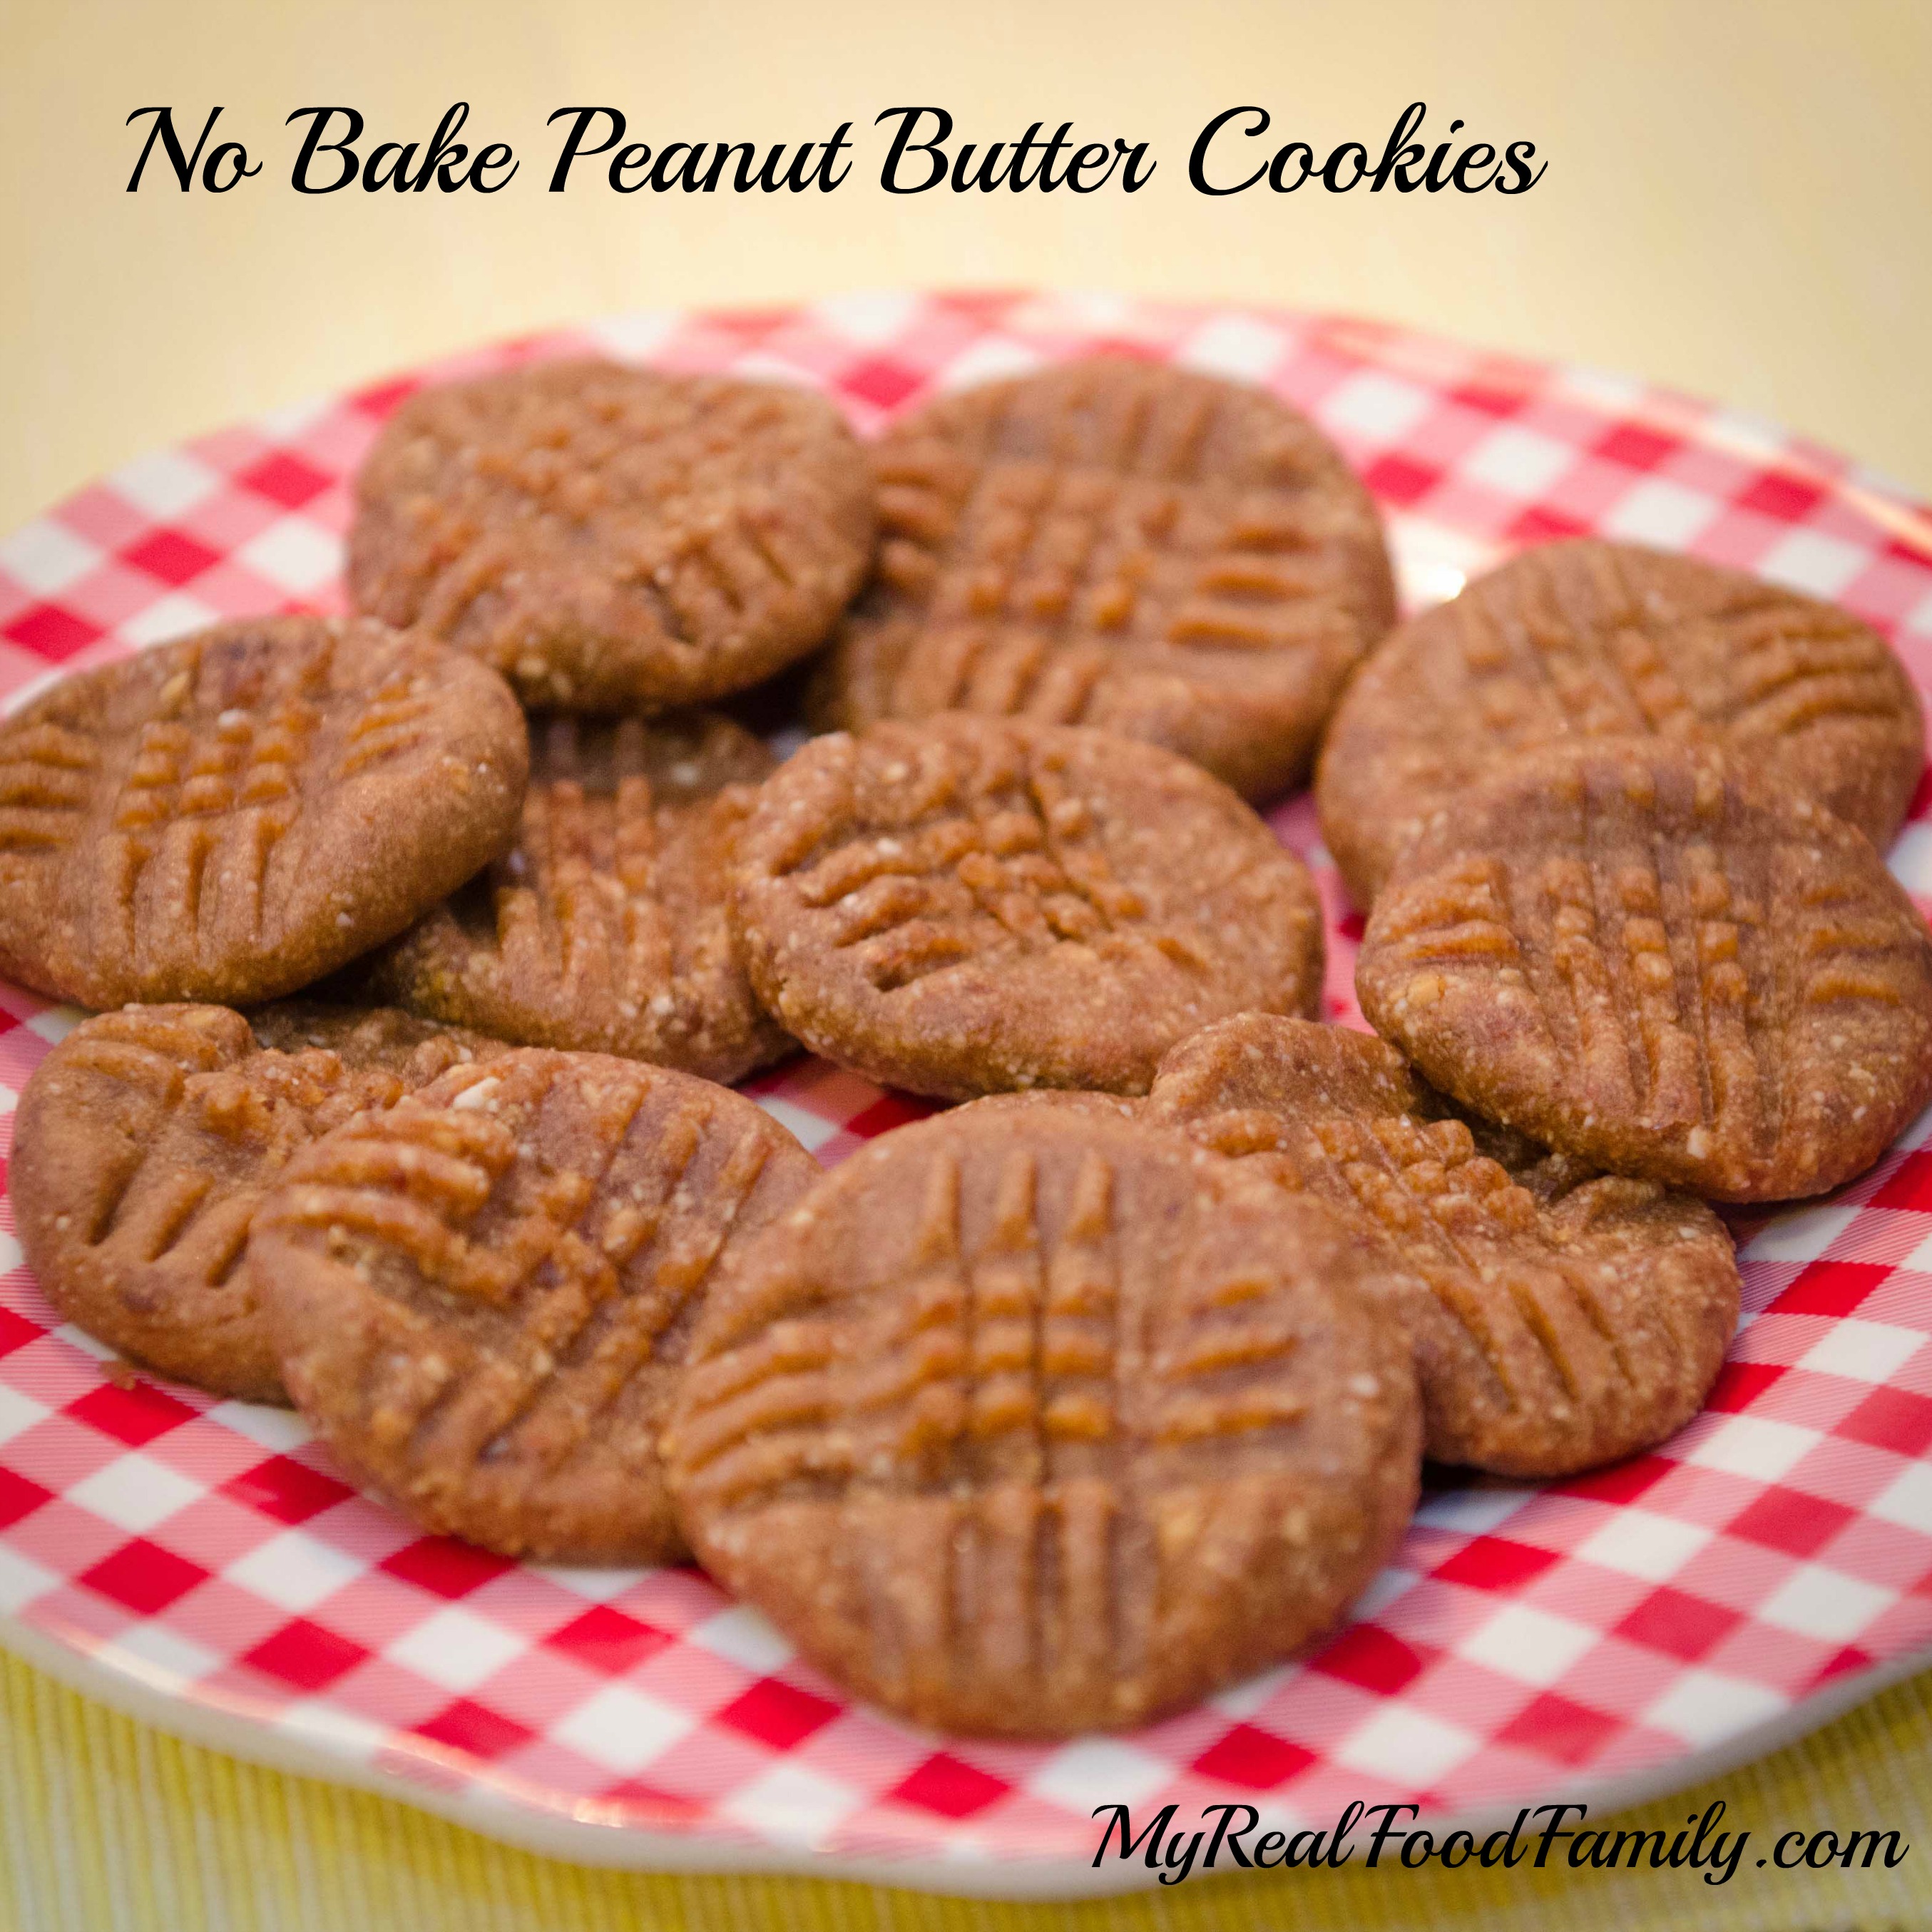 Cookies Bake  Real cookies  Food Peanut butter how make No Butter My bake  peanut no Family to